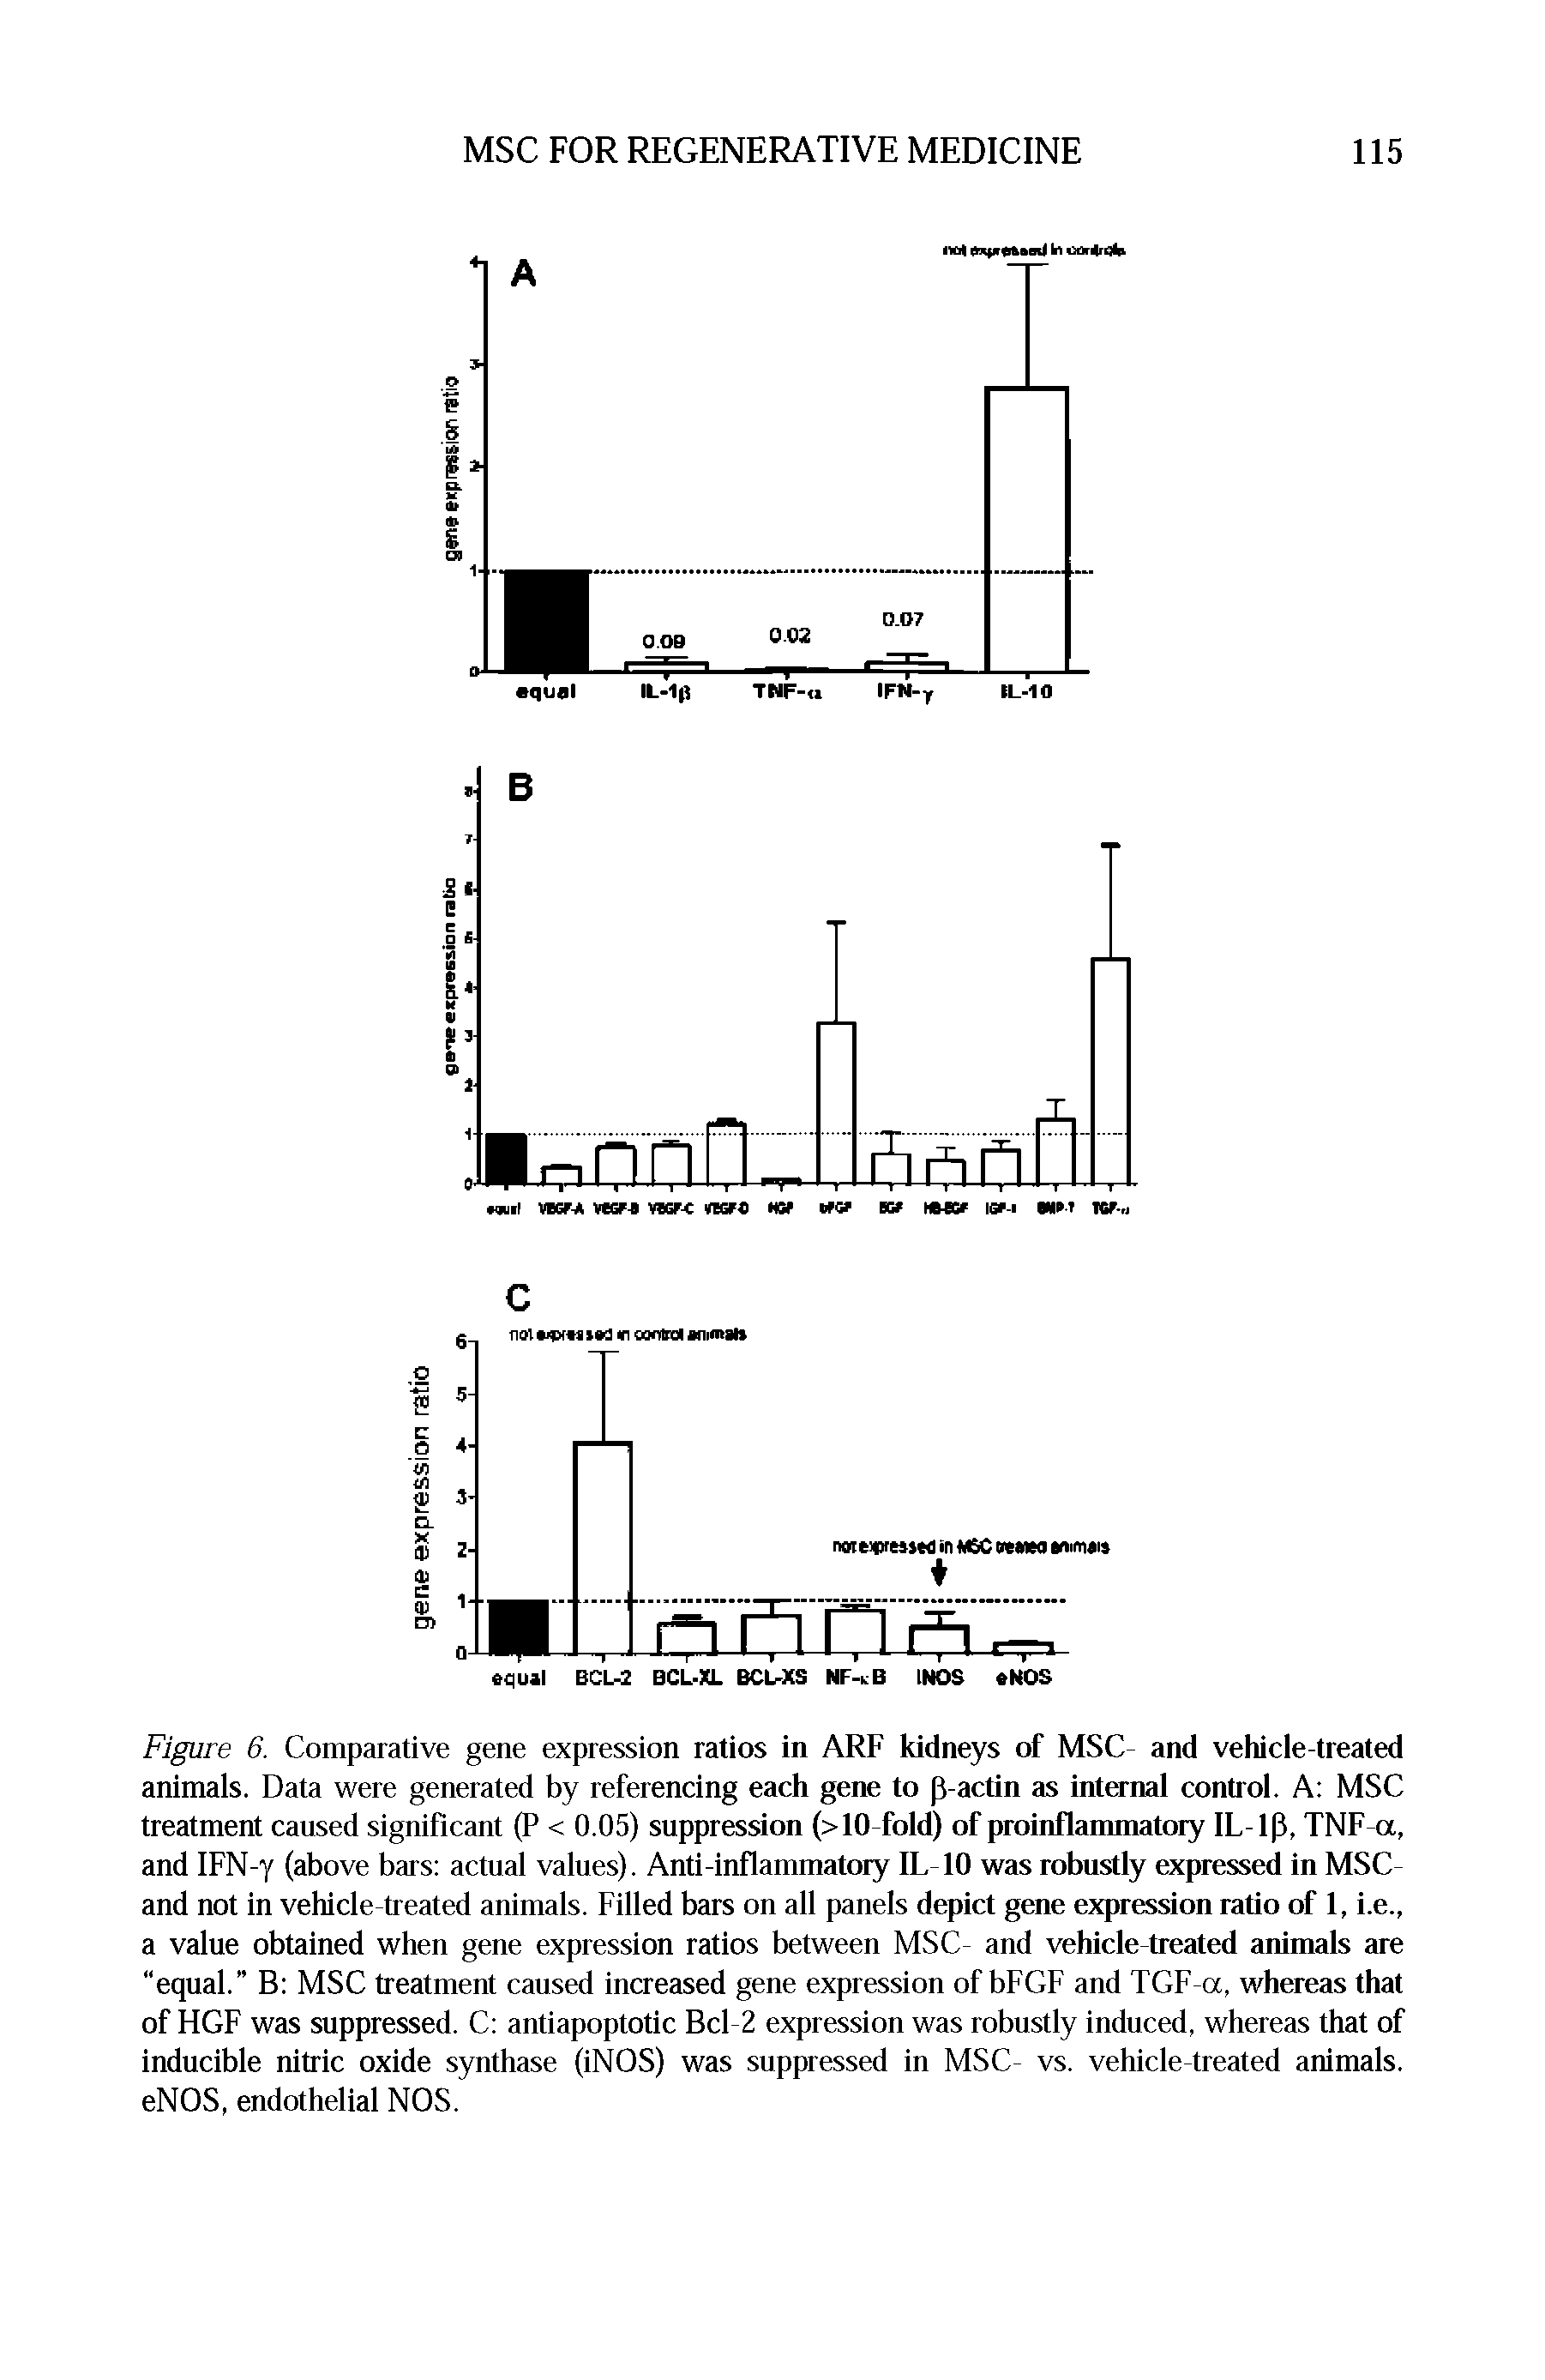 Figure 6. Comparative gene expression ratios in ARF kidneys of MSC- and vehicle-treated animals. Data were generated by referencing each gene to p-actin as internal control. A MSC treatment cansed significant (P < 0.05) suppression (> 10 fold) of proinflammatory IL-ip, TNF a, and IFN-y (above bars actnal valnes). Anti-inflammatory lL-10 was robustly expressed in MSC-and not in vehicle treated animals. Filled bars on all panels depict gene expression ratio of 1, i.e., a value obtained when gene expression ratios between MSC- and vehicle-treated animals are "equal. B MSC treatment cansed increased gene expression of bFGF and TGF-a, whereas that of HGF was suppressed. C antiapoptotic Bcl-2 expression was robnstly indnced, whereas that of inducible nitric oxide synthase (iNOS) was snppressed in MSC- vs. vehicle-treated animals. eNOS, endothelial NOS.